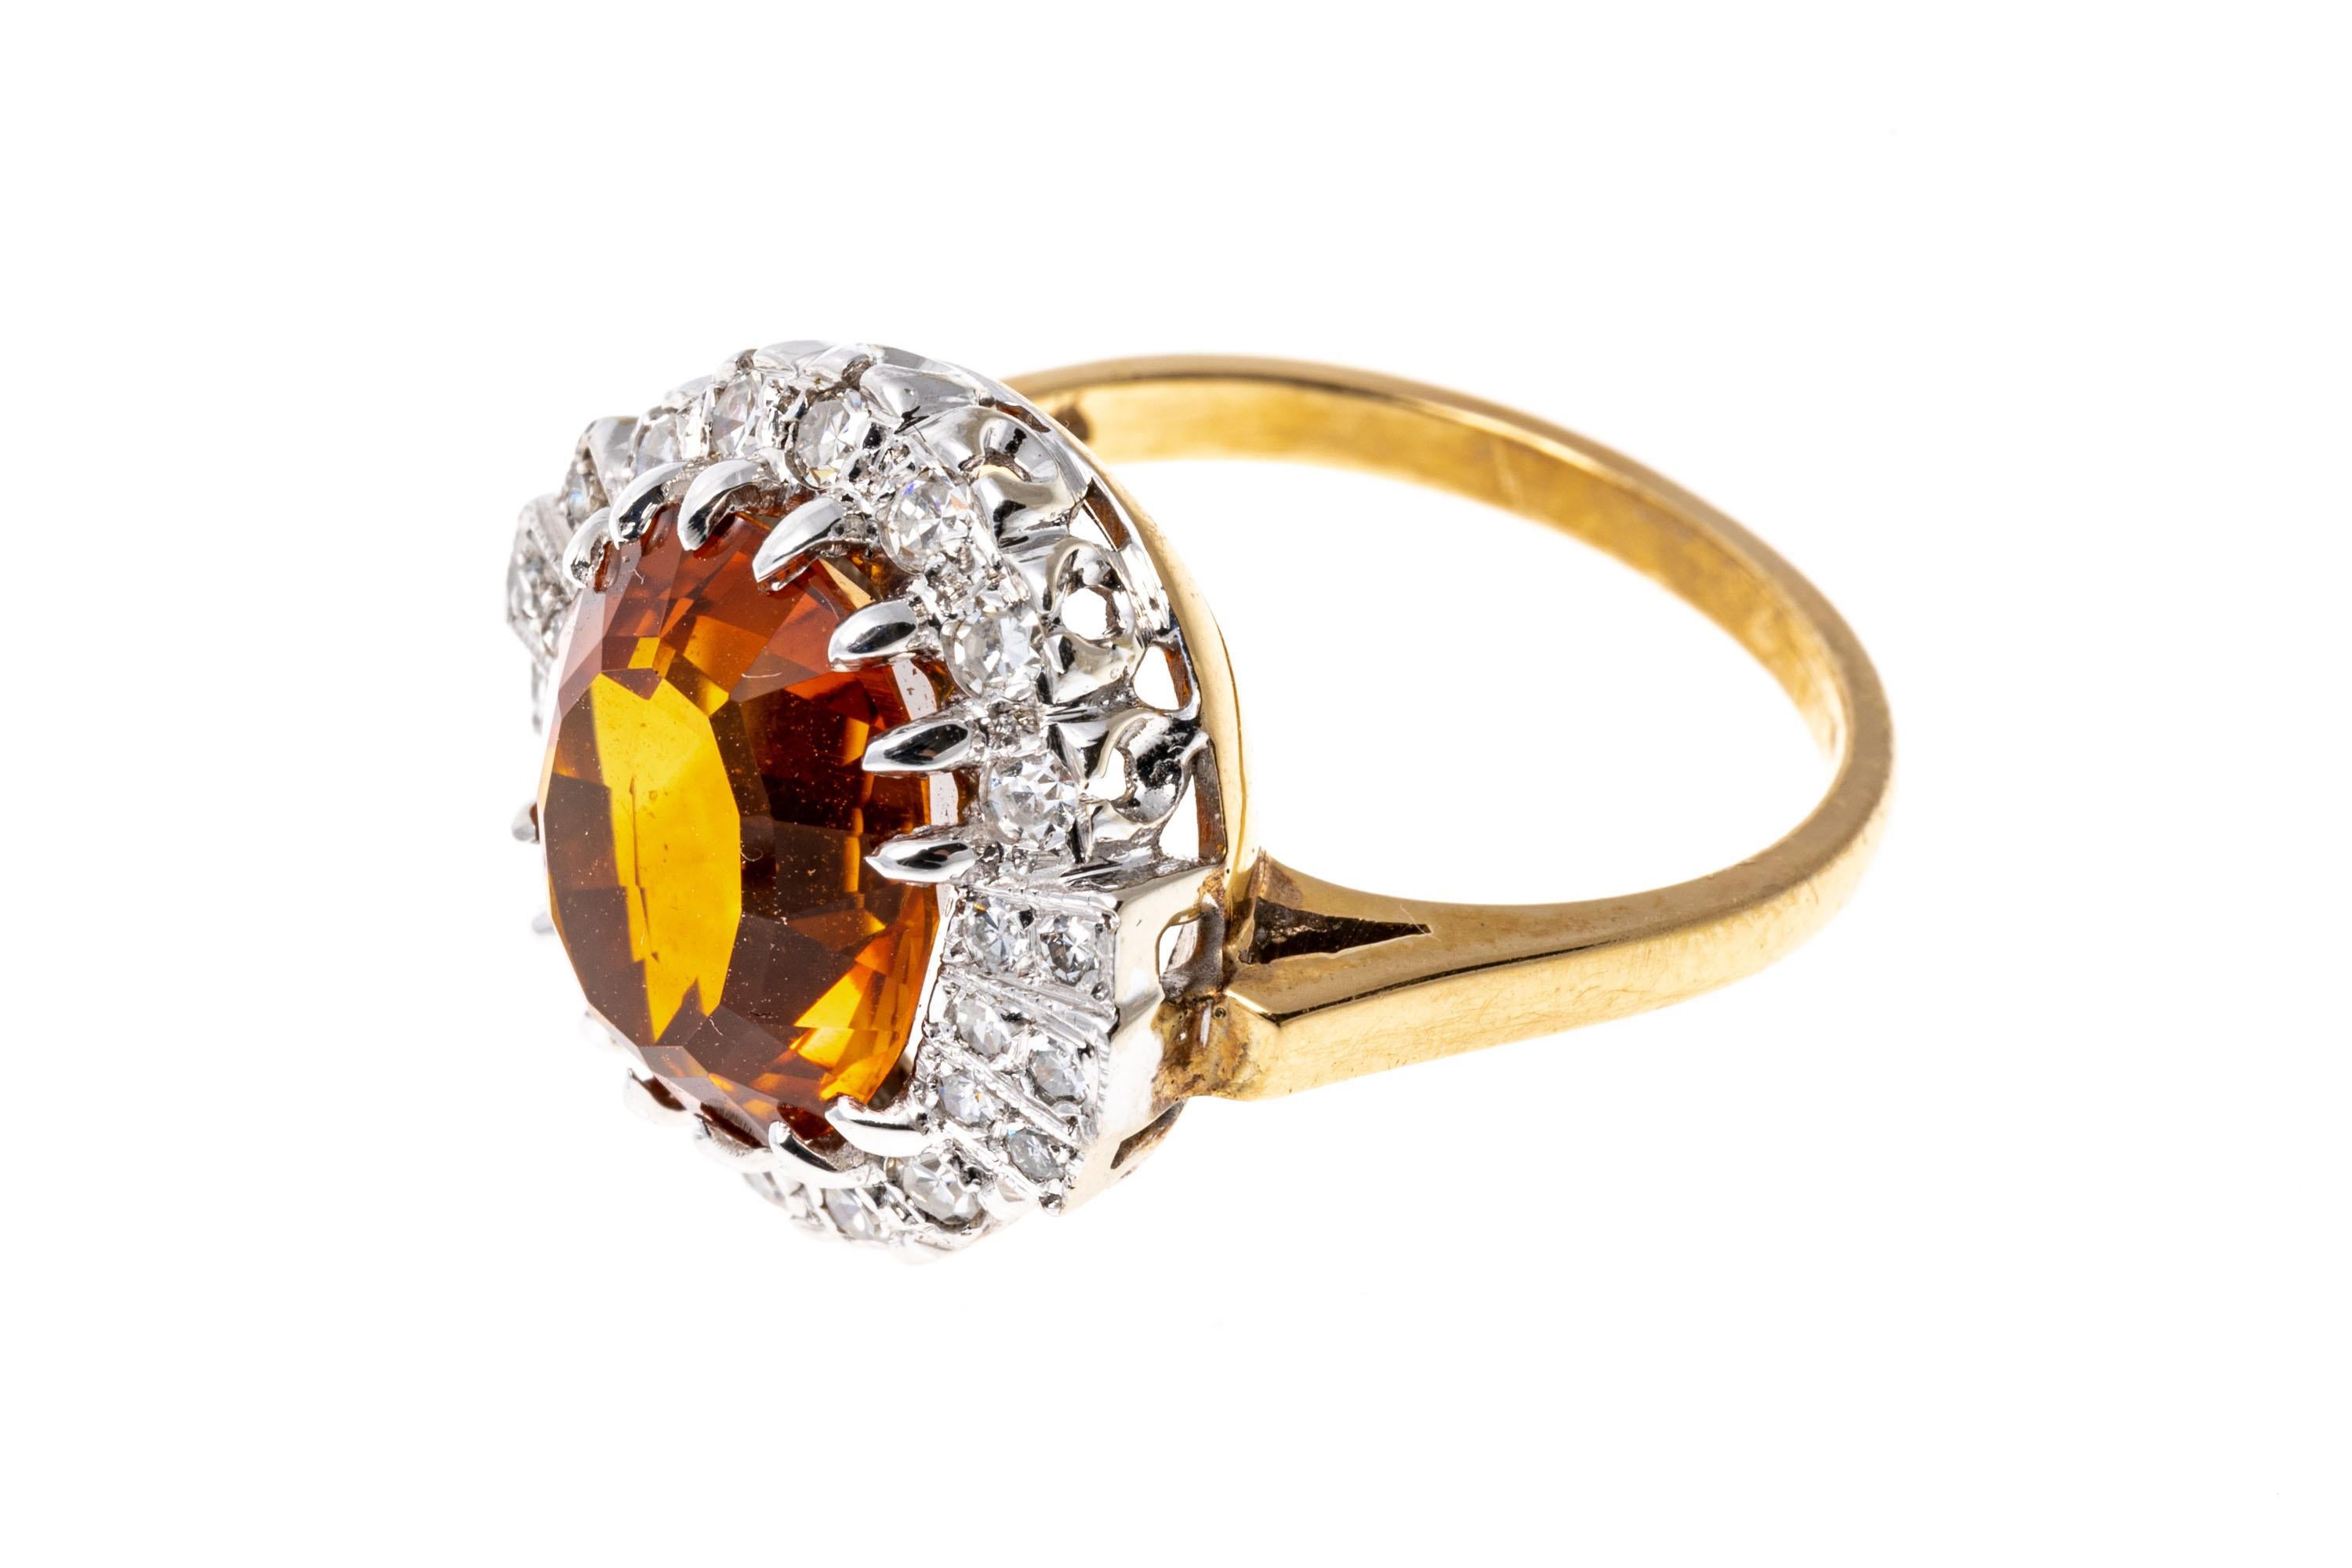 14k Yellow Gold Oval Citrine 'App. 3.95 CTS' and Diamond Halo Ring For Sale 2